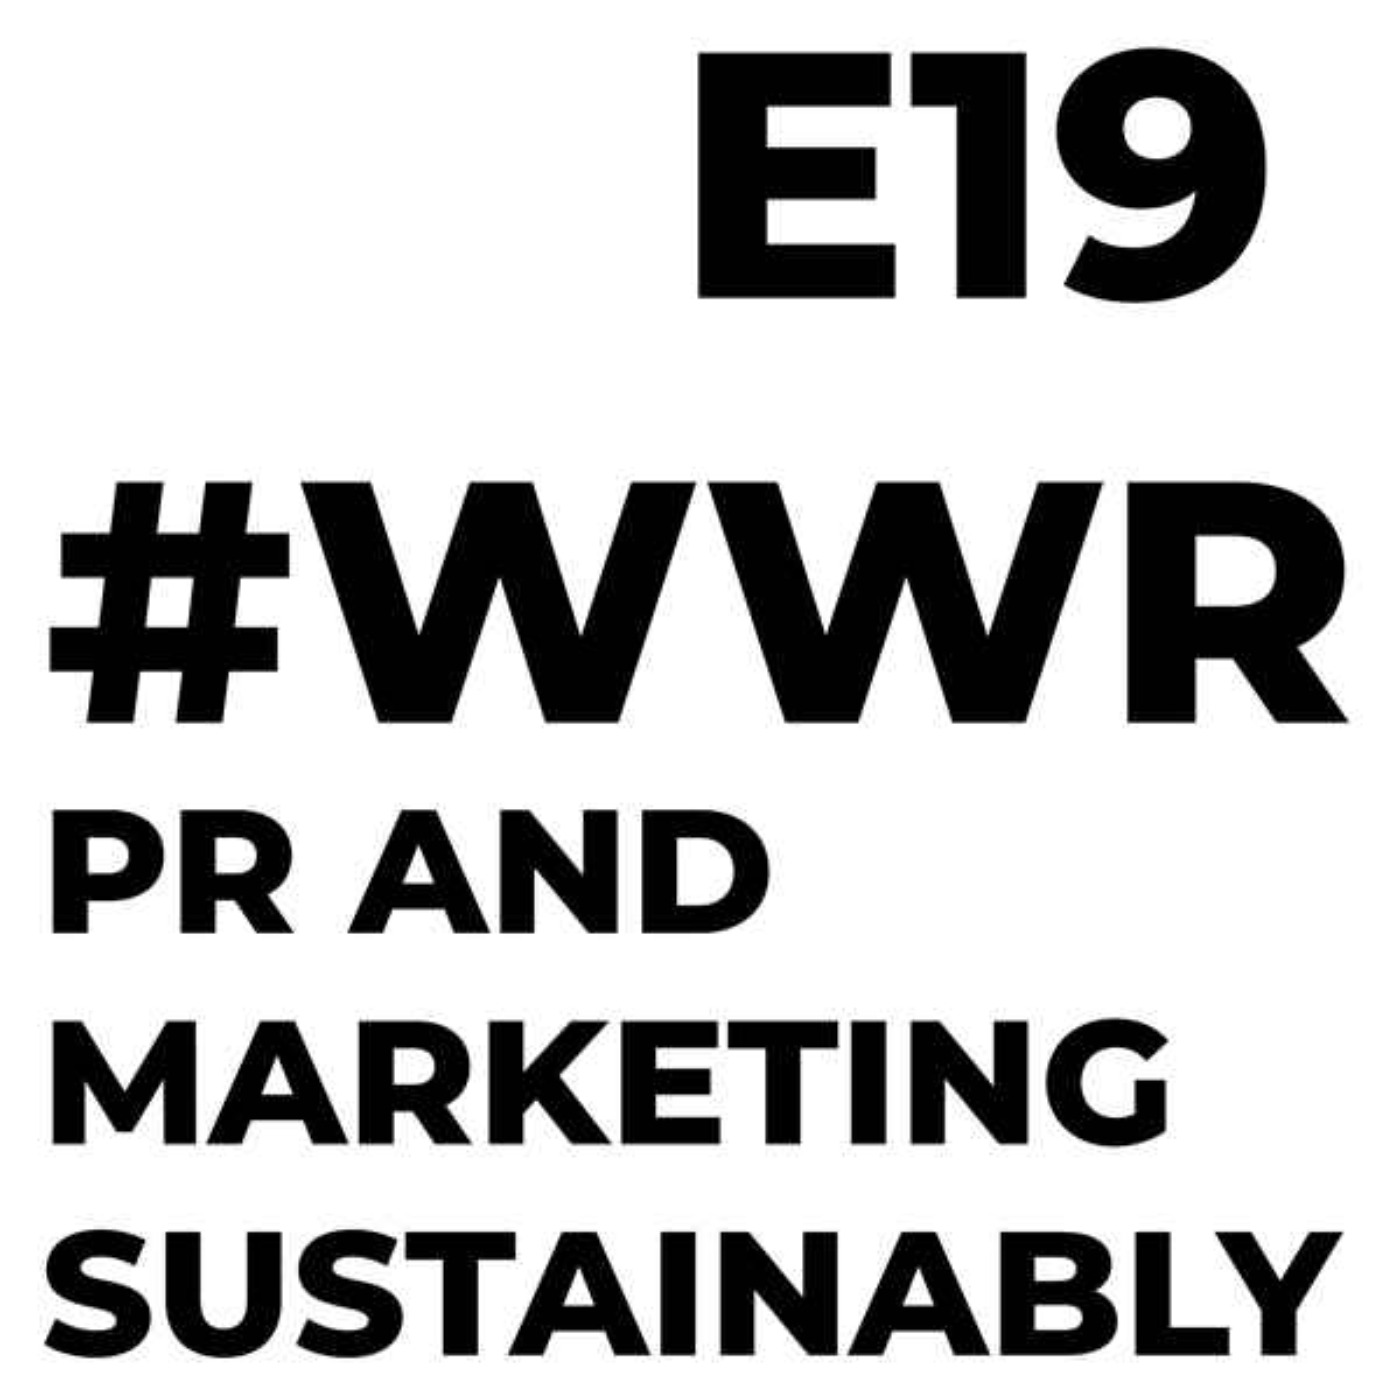 PR and Marketing Sustainably